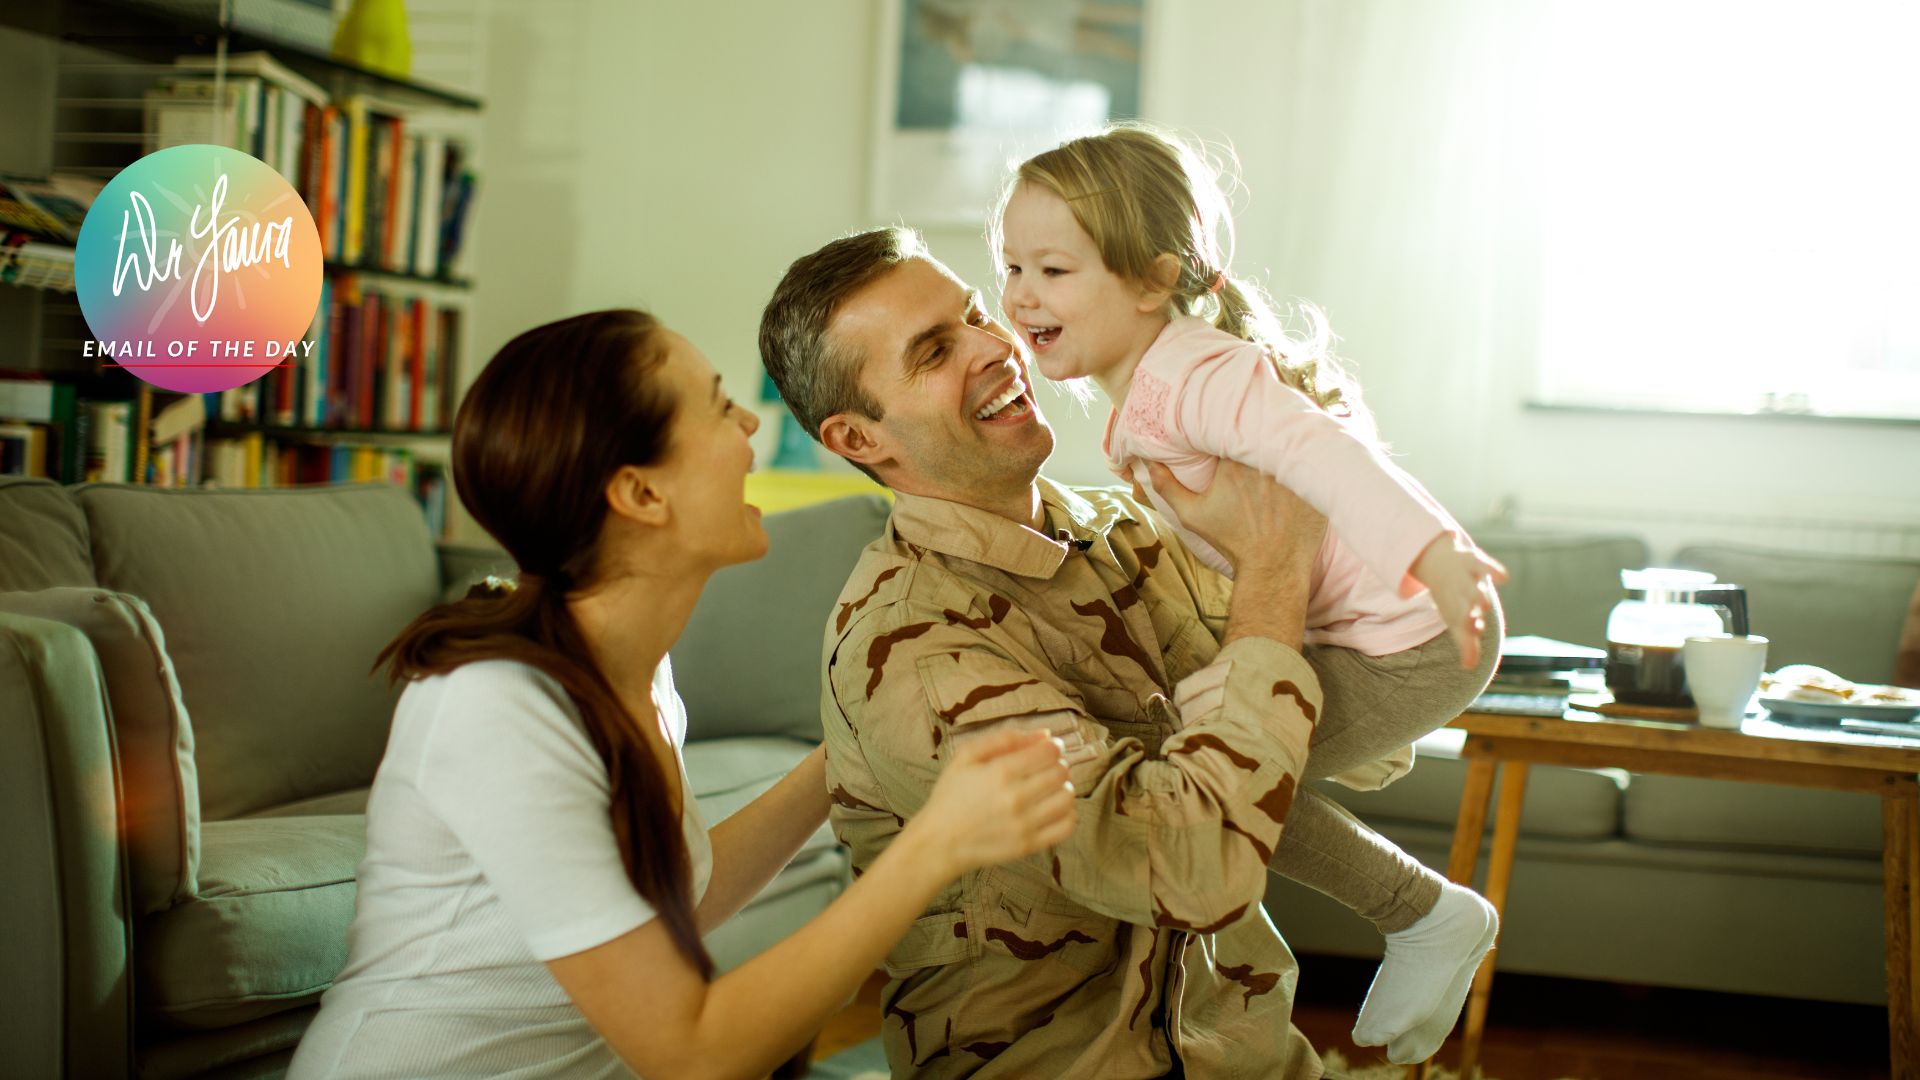 Man in military uniform holds little girl in his arms while woman in white shirt holds onto his arms